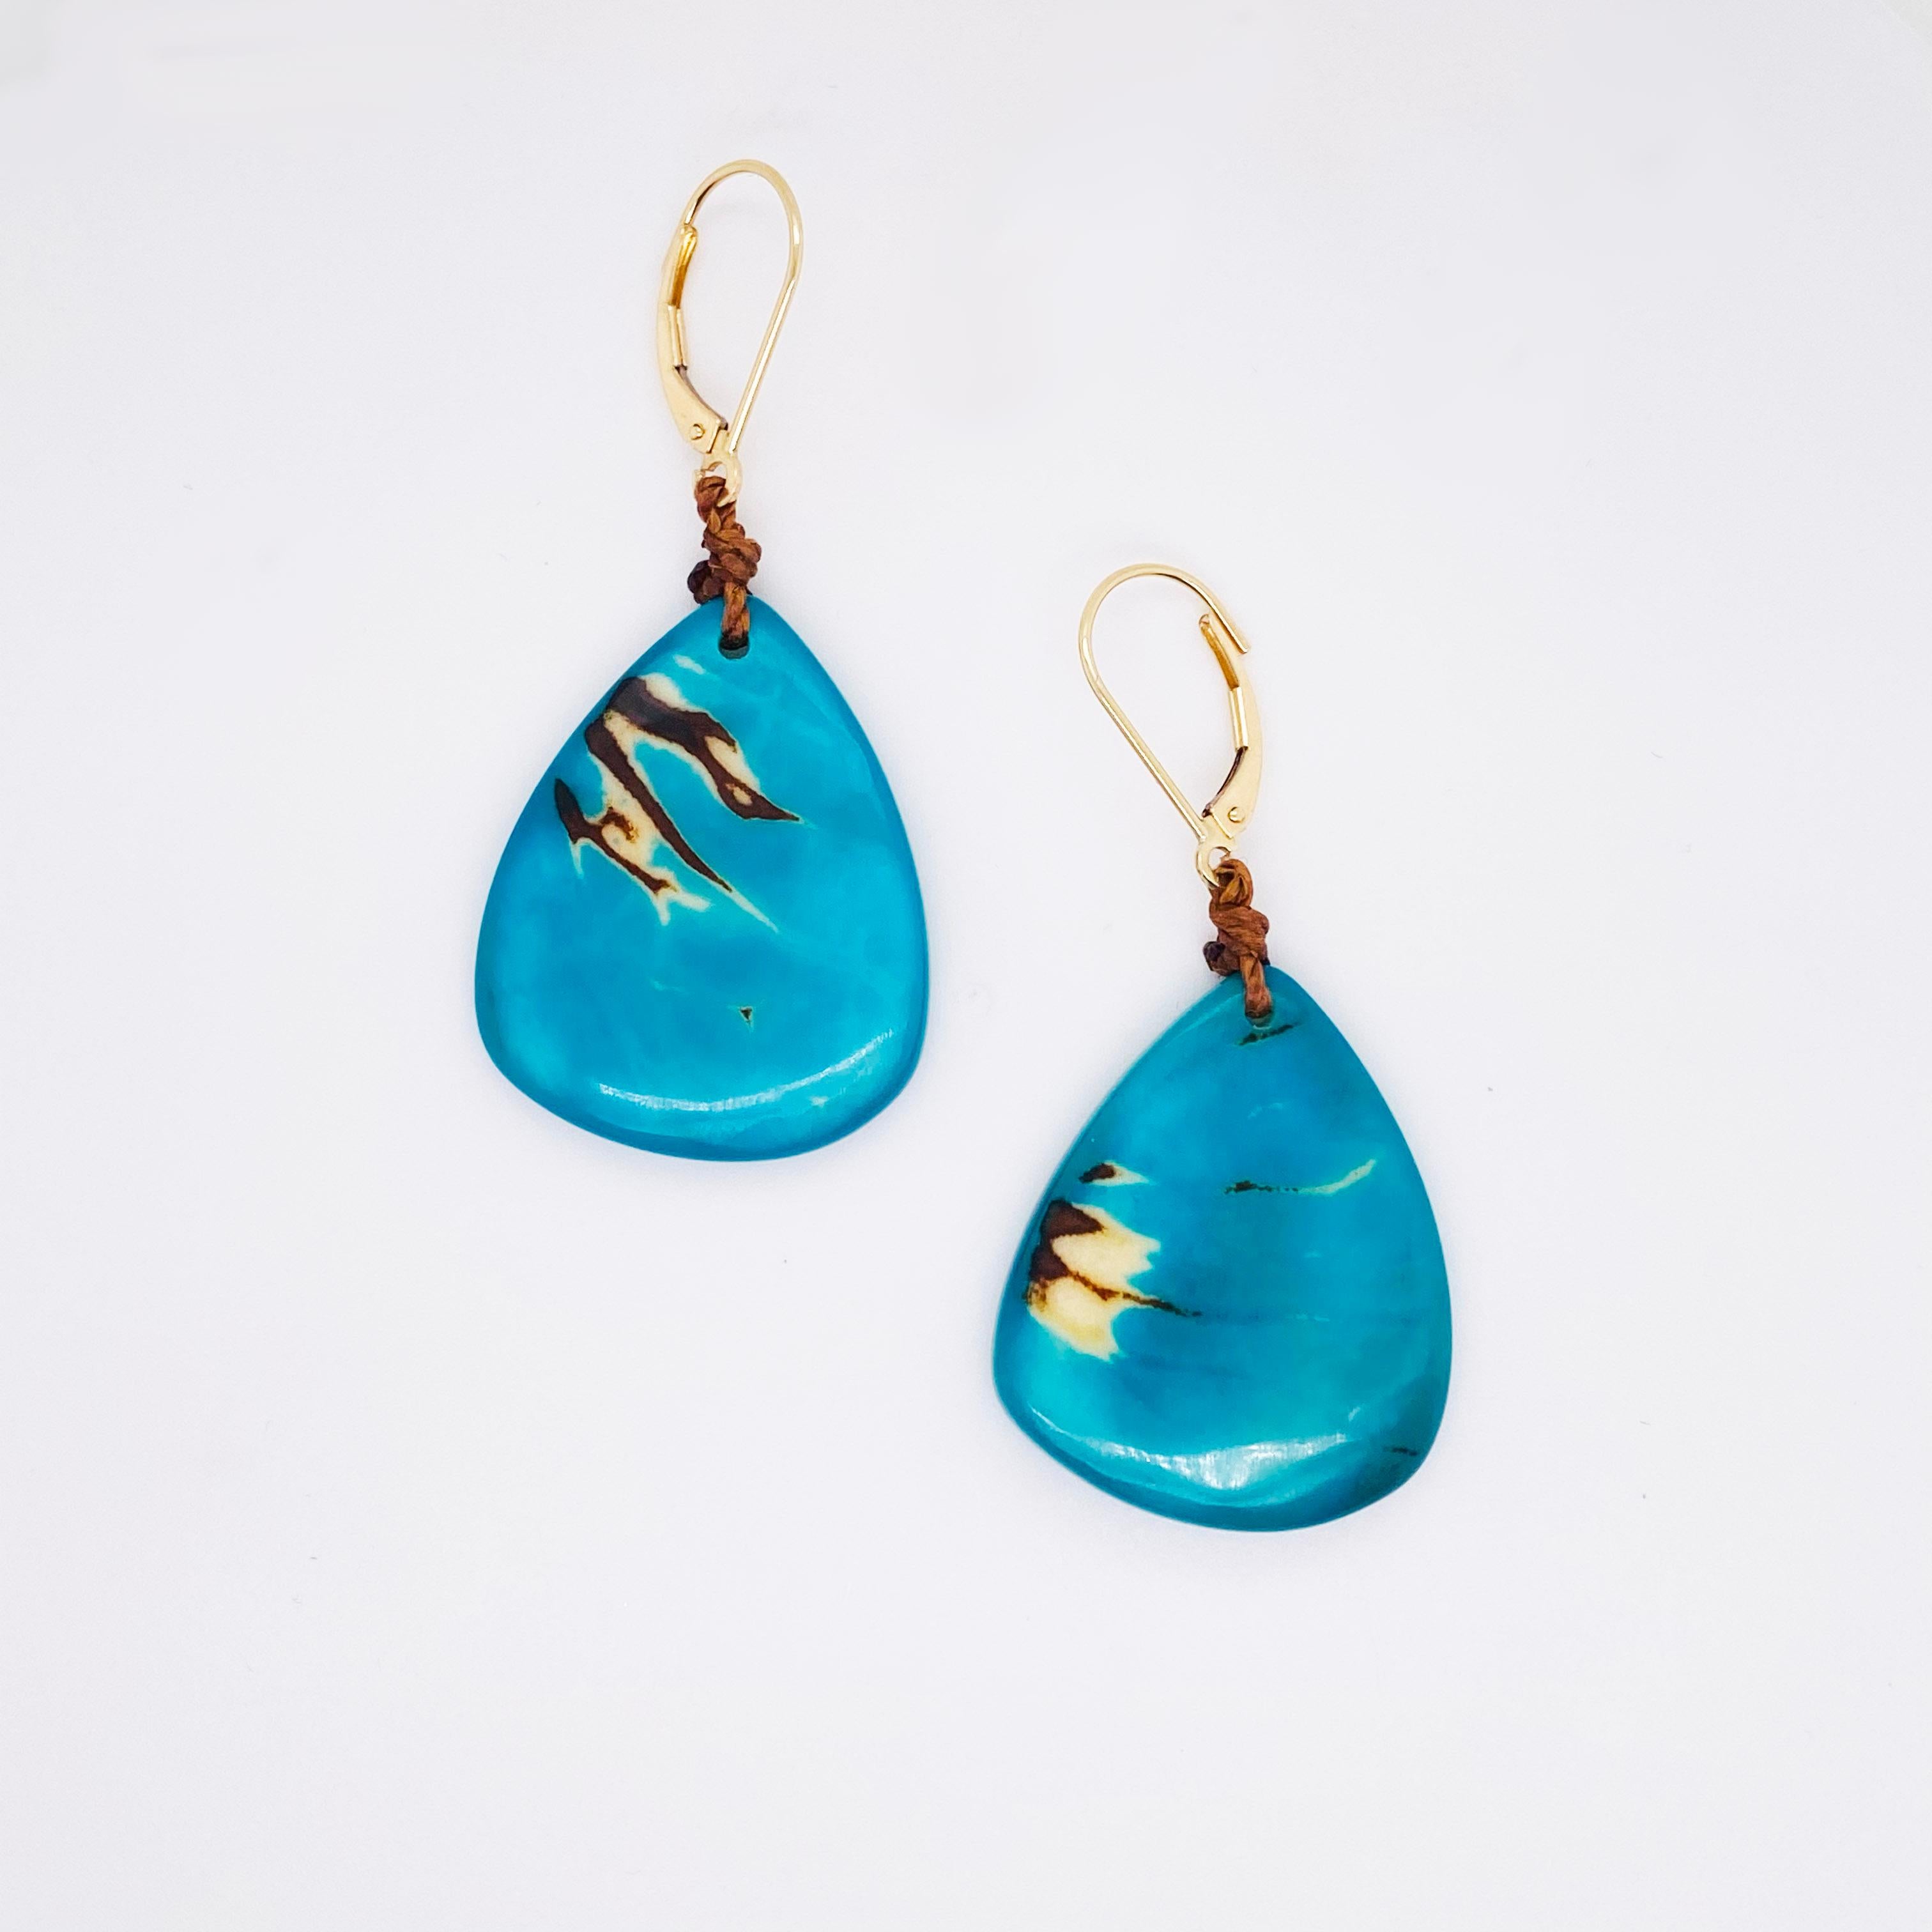 Arts and Crafts Palm Tree Nut Dangle Earrings in 14k Yellow Gold, Turquoise Nut from Rainforest For Sale